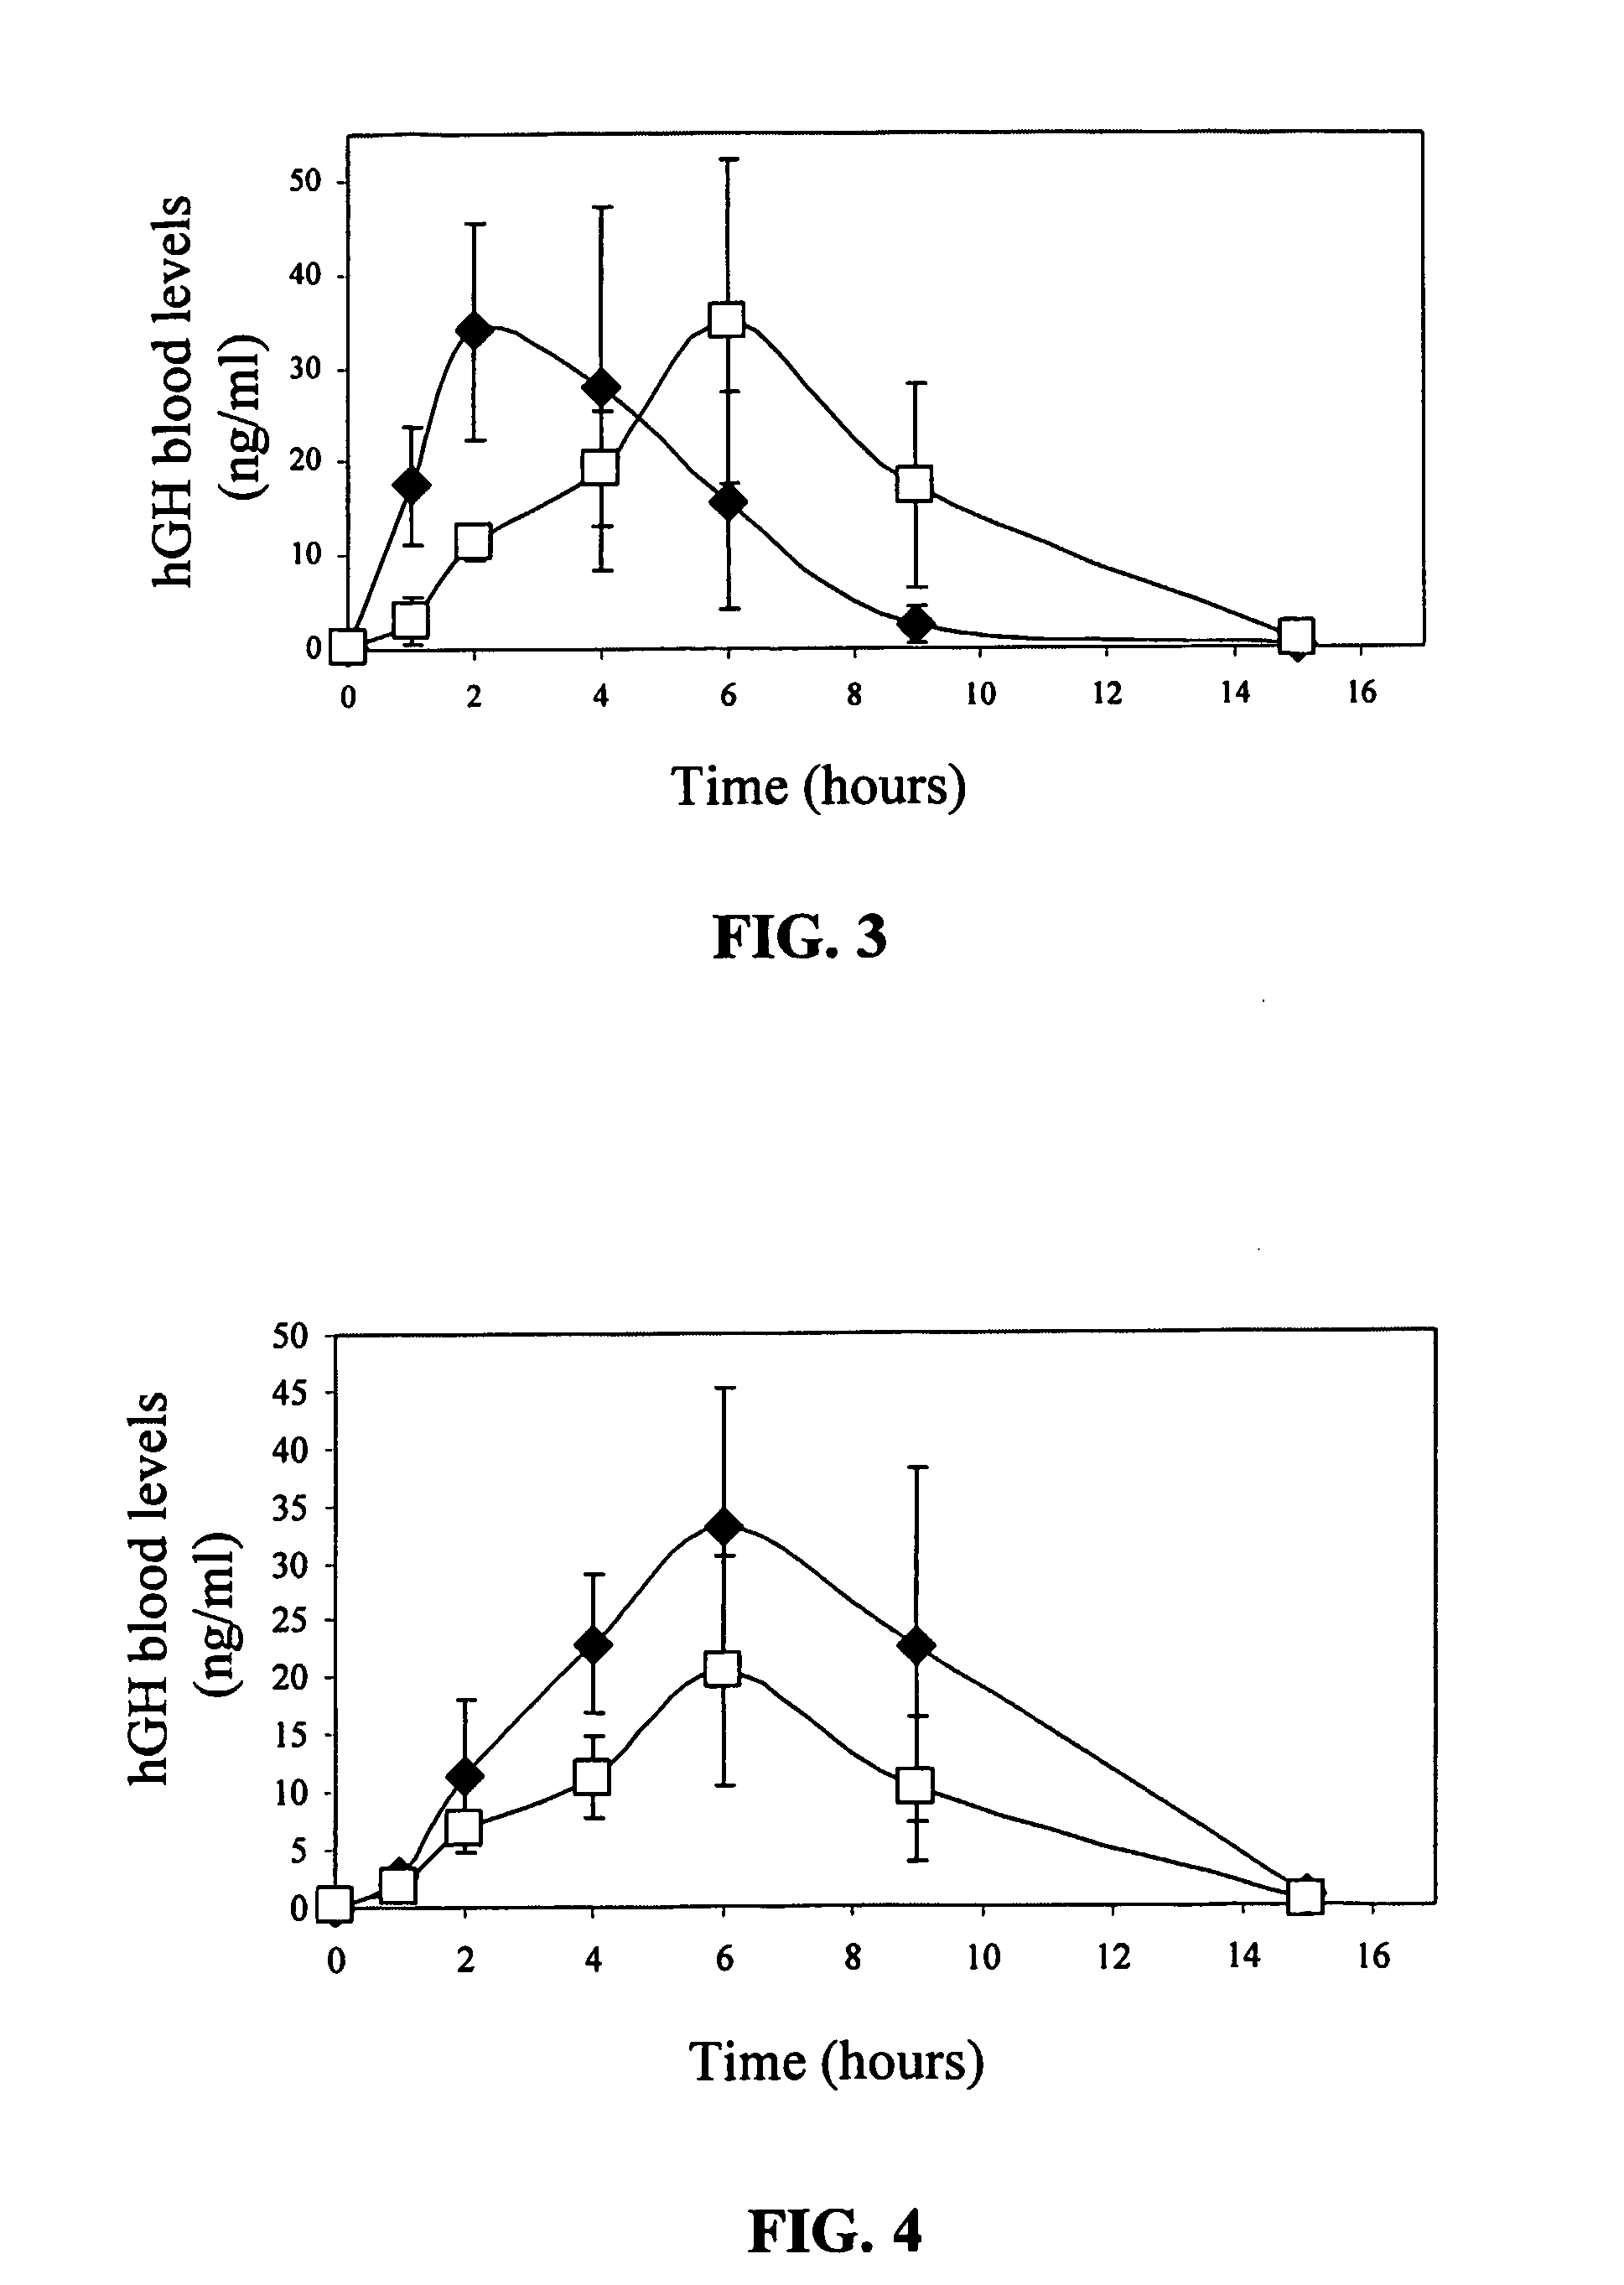 Transdermal System for Sustained Delivery of Polypeptides